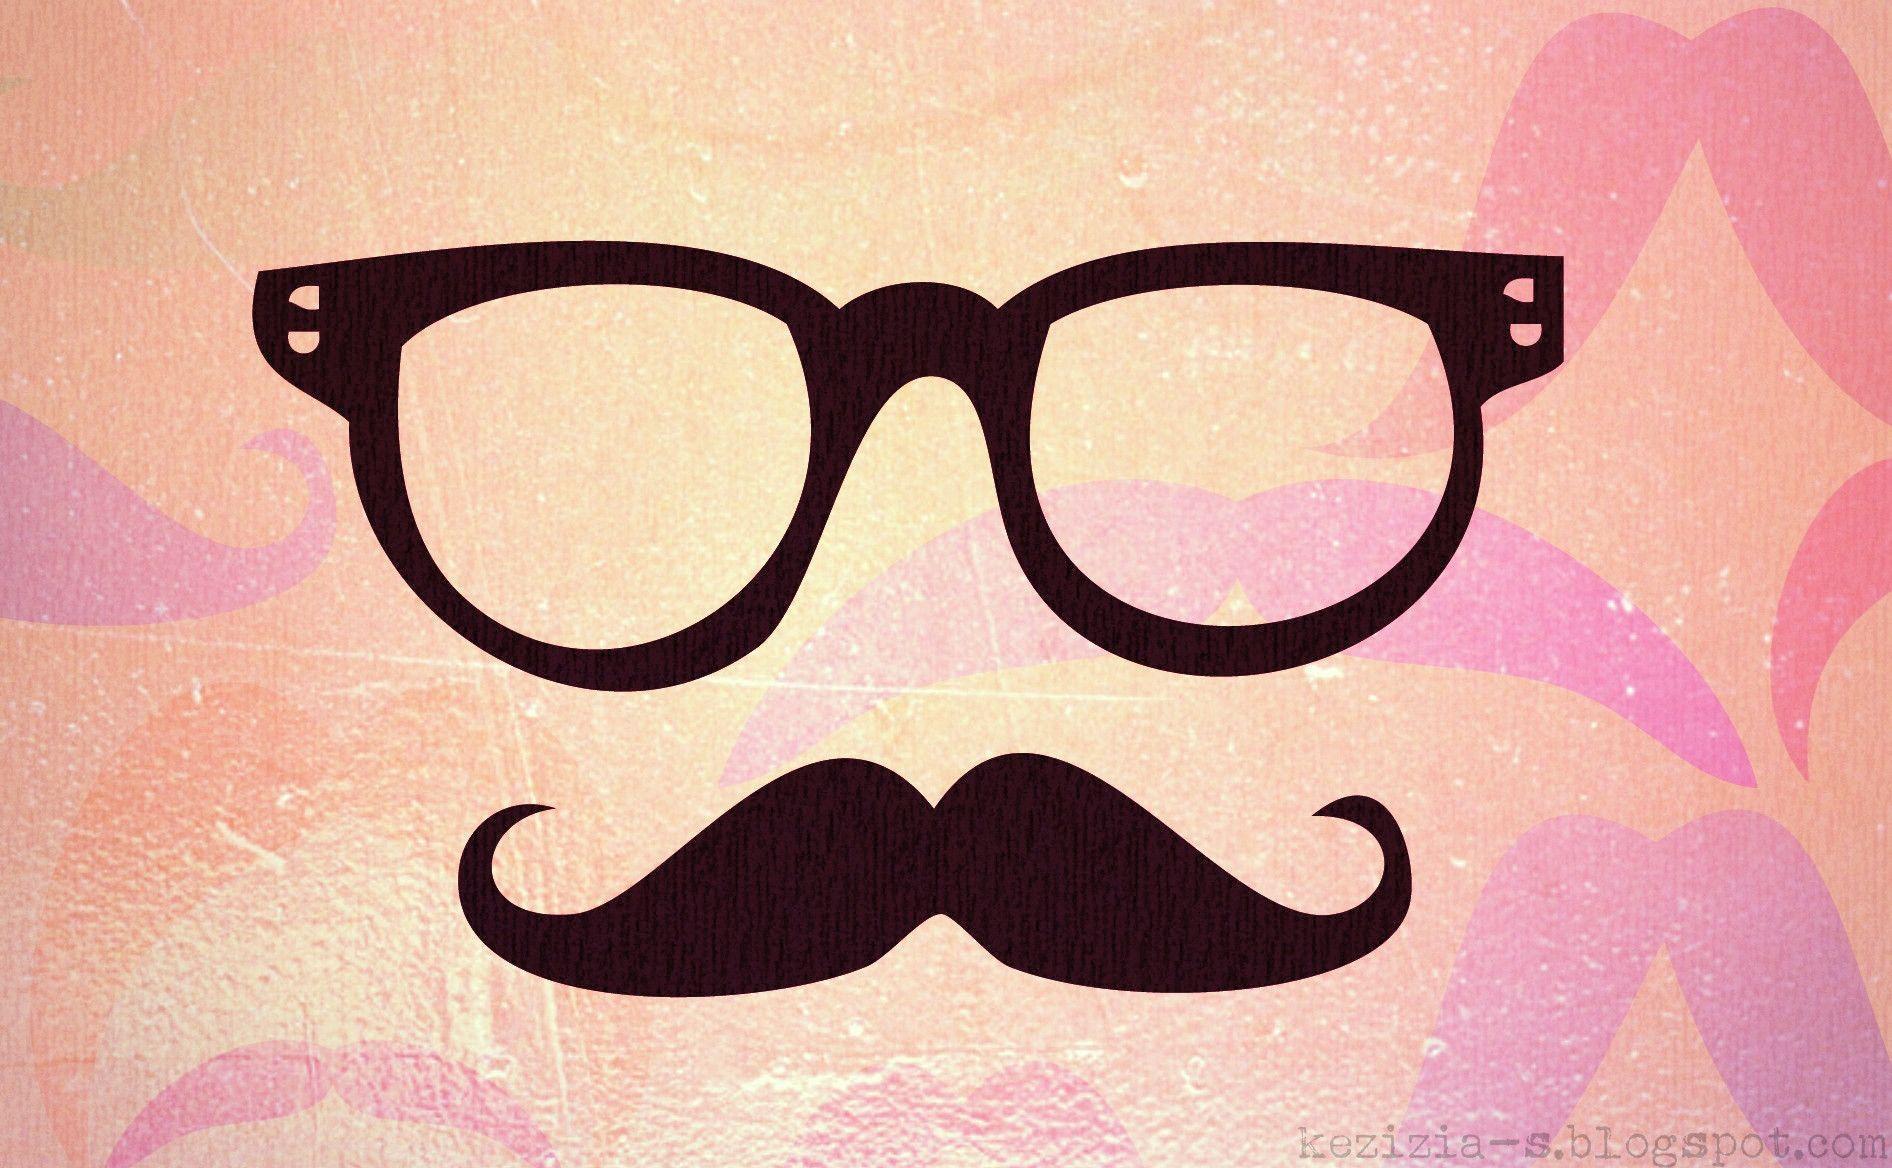 Cute Mustache Wallpapers - Top Free